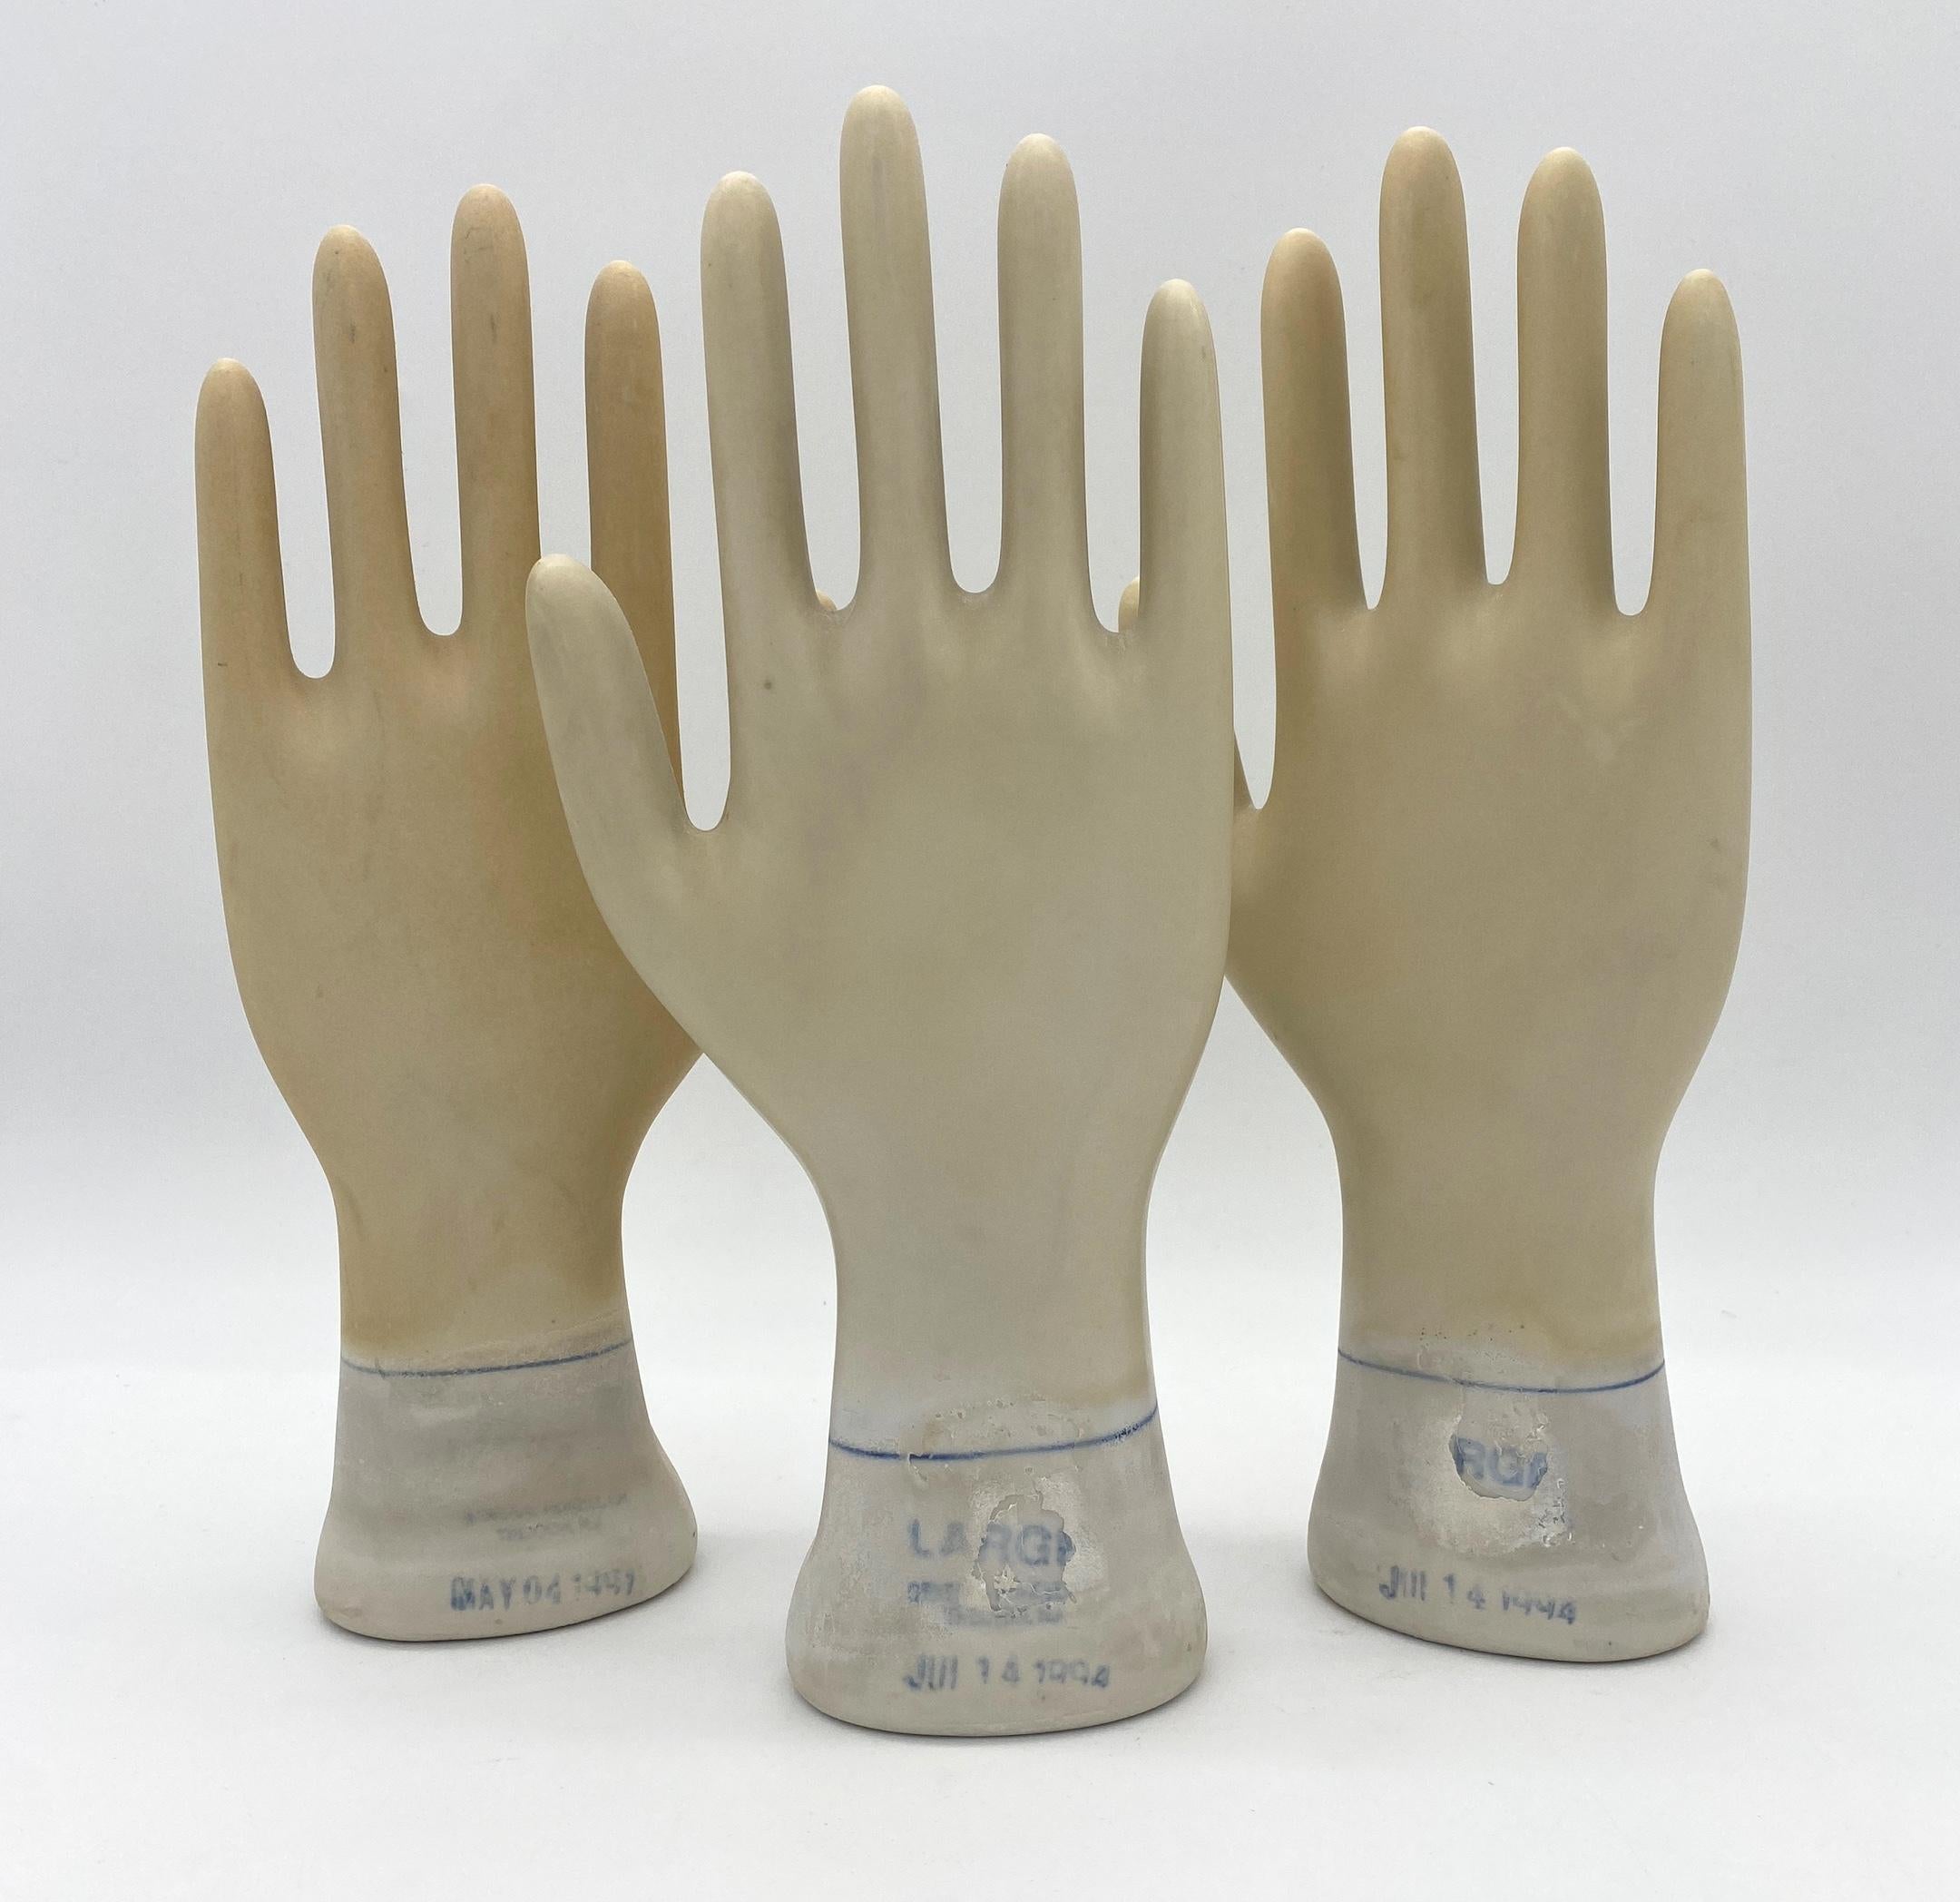 Set of Three Vintage American Industrial Figural Porcelain Glove Molds 
USA, 1994, dated and inscribed 

A remarkable set of three Vintage American Industrial Figural Porcelain Glove Molds, a unique relic from the manufacturing industry in the USA.